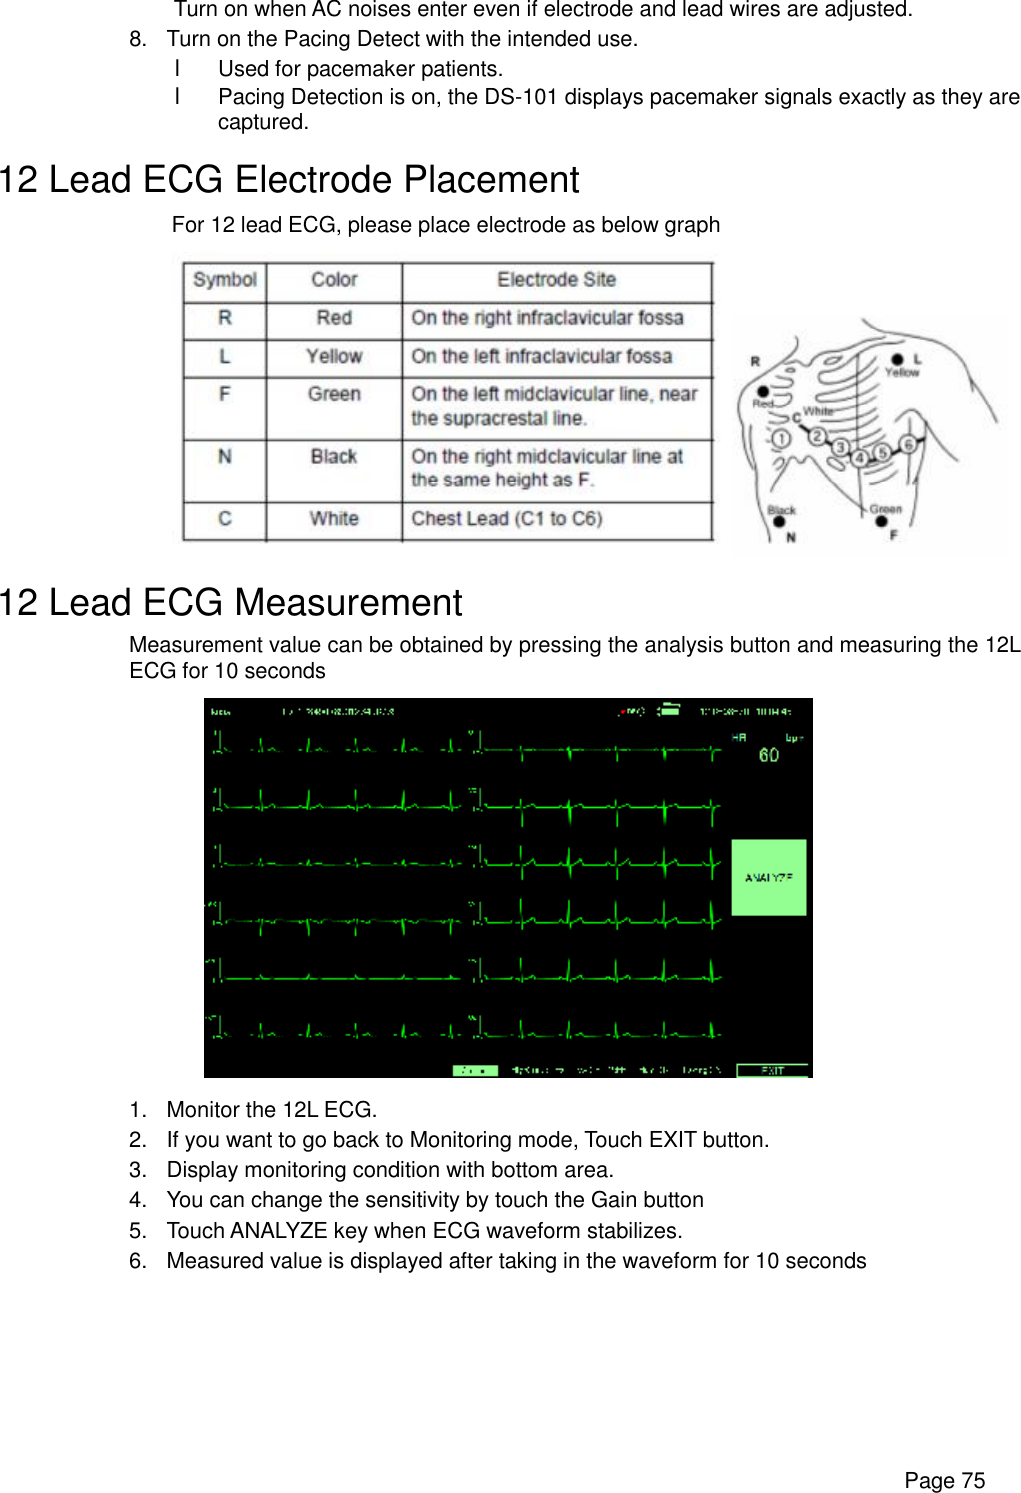      Page 75  Turn on when AC noises enter even if electrode and lead wires are adjusted. 8. Turn on the Pacing Detect with the intended use. l Used for pacemaker patients. l Pacing Detection is on, the DS-101 displays pacemaker signals exactly as they are captured. 12 Lead ECG Electrode Placement For 12 lead ECG, please place electrode as below graph  12 Lead ECG Measurement Measurement value can be obtained by pressing the analysis button and measuring the 12L ECG for 10 seconds  1. Monitor the 12L ECG. 2. If you want to go back to Monitoring mode, Touch EXIT button. 3. Display monitoring condition with bottom area. 4. You can change the sensitivity by touch the Gain button 5. Touch ANALYZE key when ECG waveform stabilizes. 6. Measured value is displayed after taking in the waveform for 10 seconds  